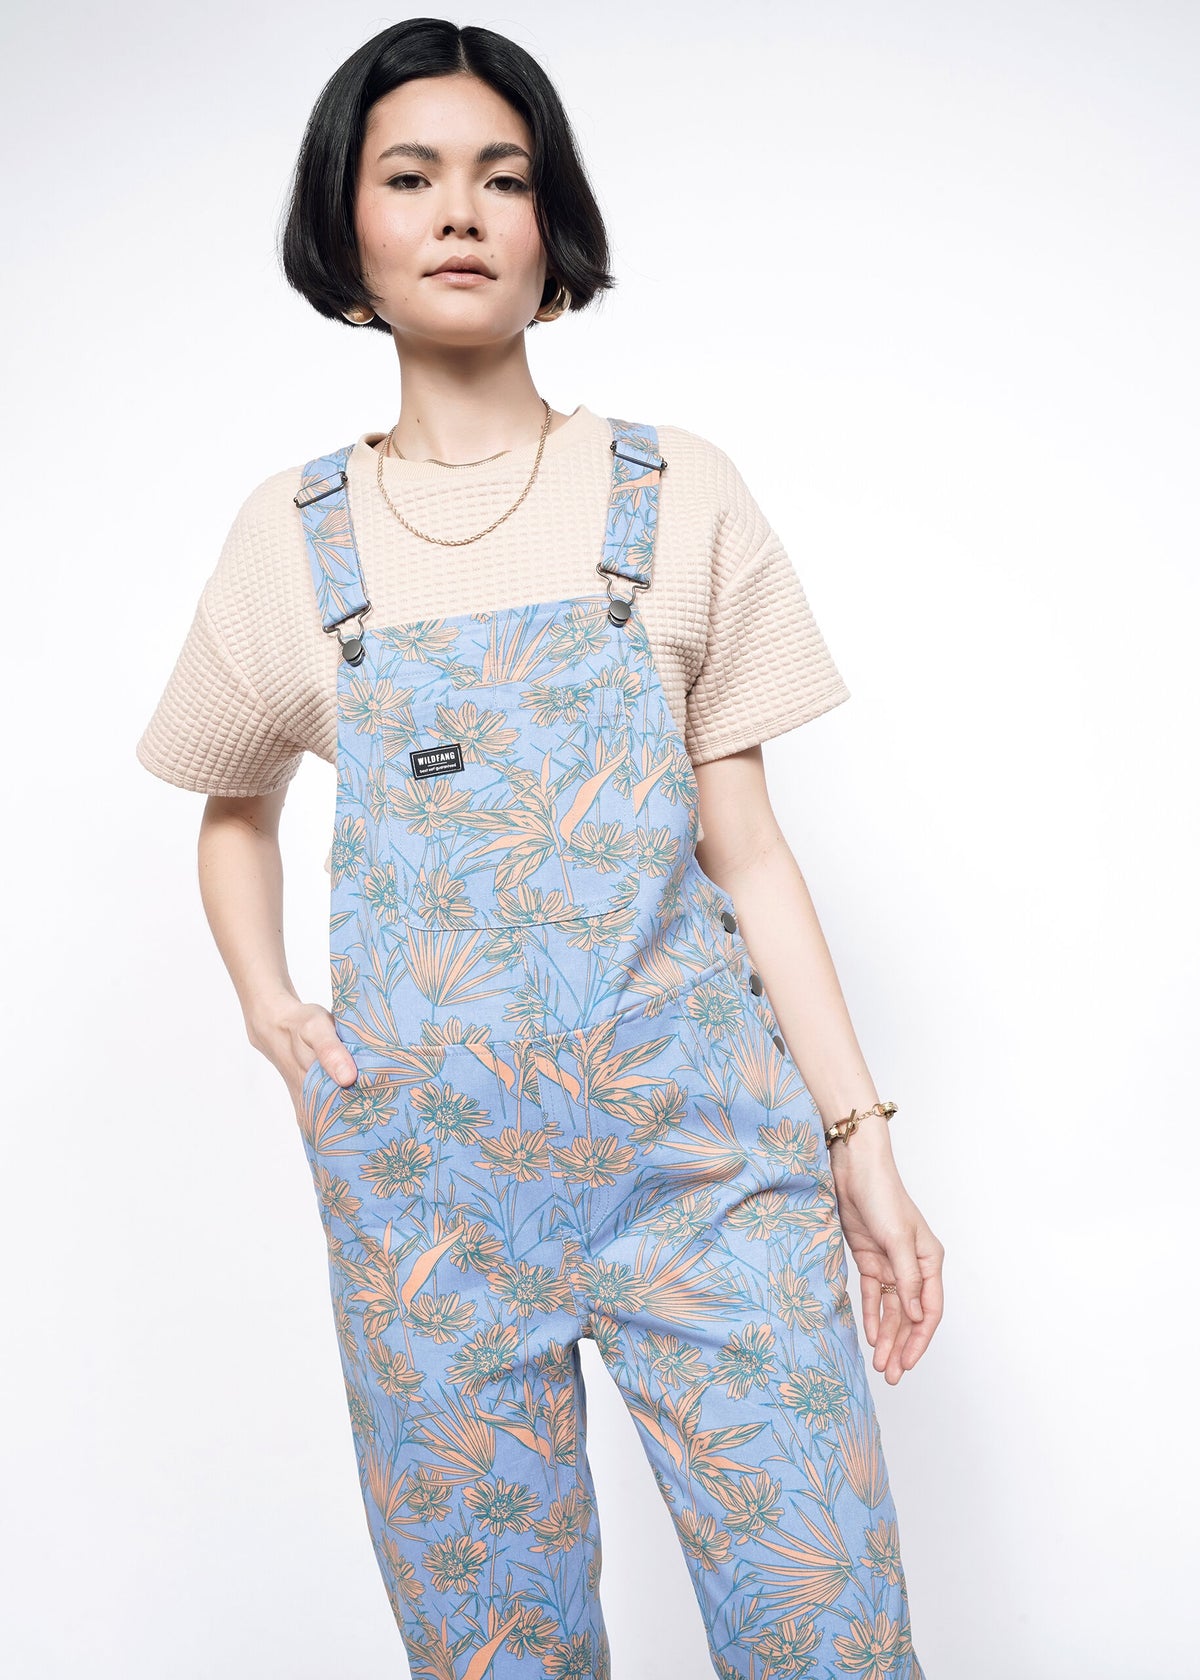 Model wearing the Essential Overall in Flower Press Periwinkle in size S wearing tan T